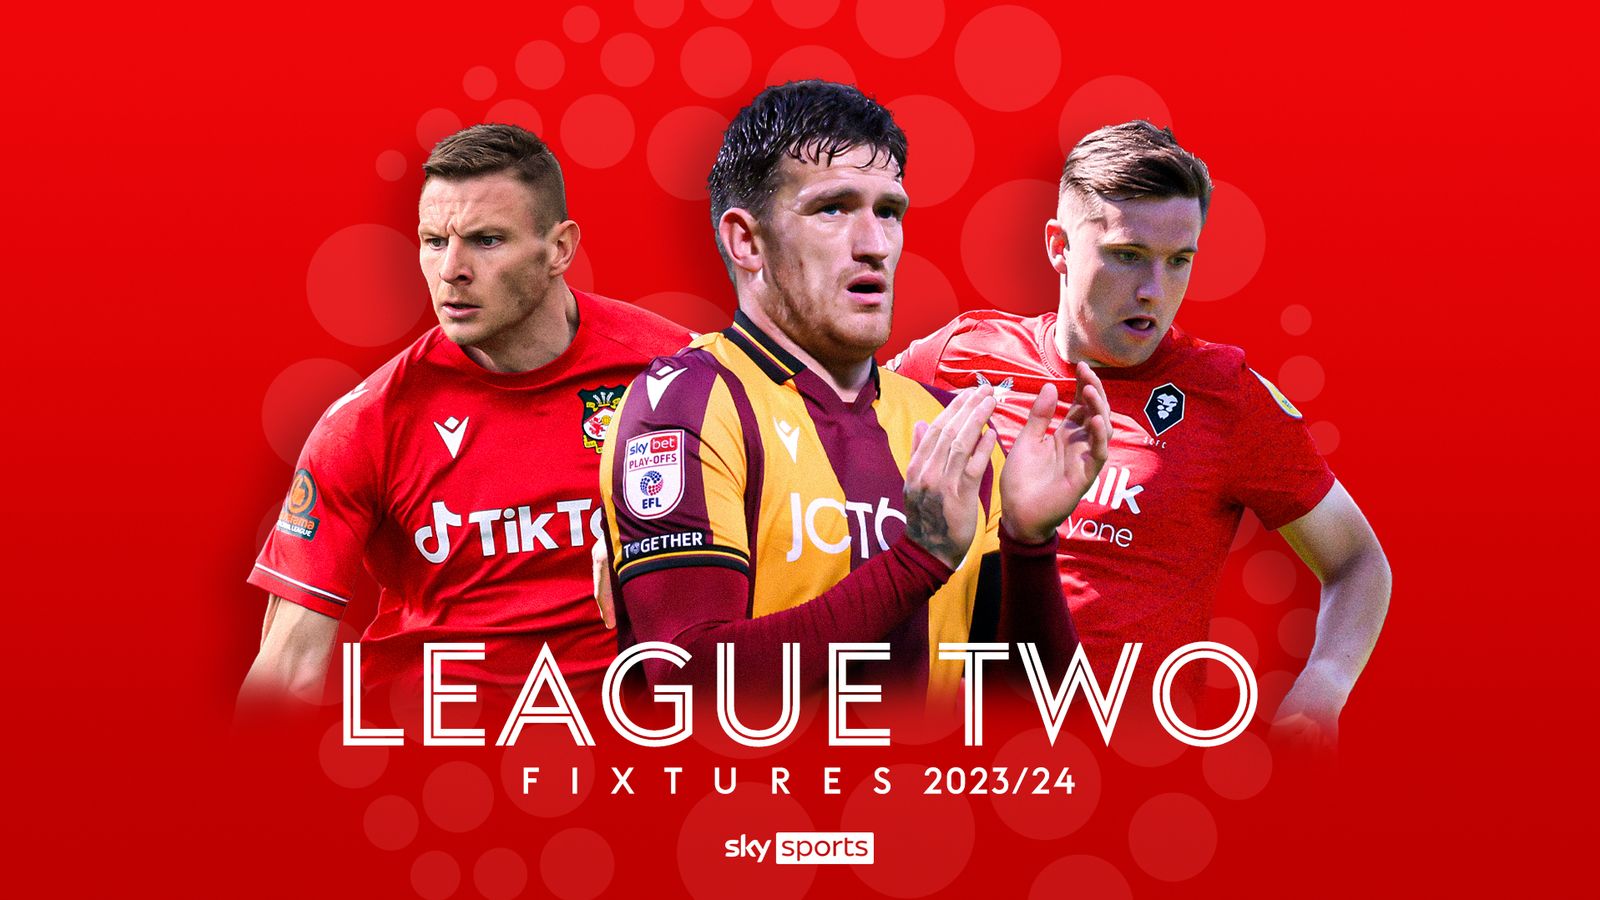 League Two 2023/24 fixtures and schedule: Wrexham mark EFL return at home to MK Dons and Notts County visit Sutton | Football News